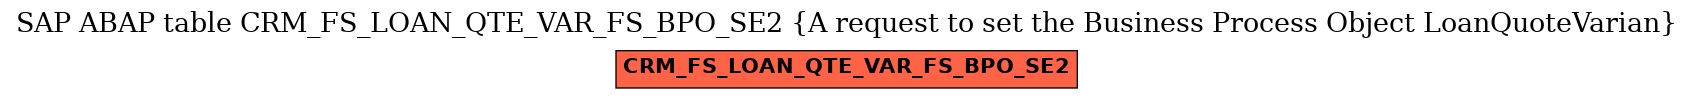 E-R Diagram for table CRM_FS_LOAN_QTE_VAR_FS_BPO_SE2 (A request to set the Business Process Object LoanQuoteVarian)